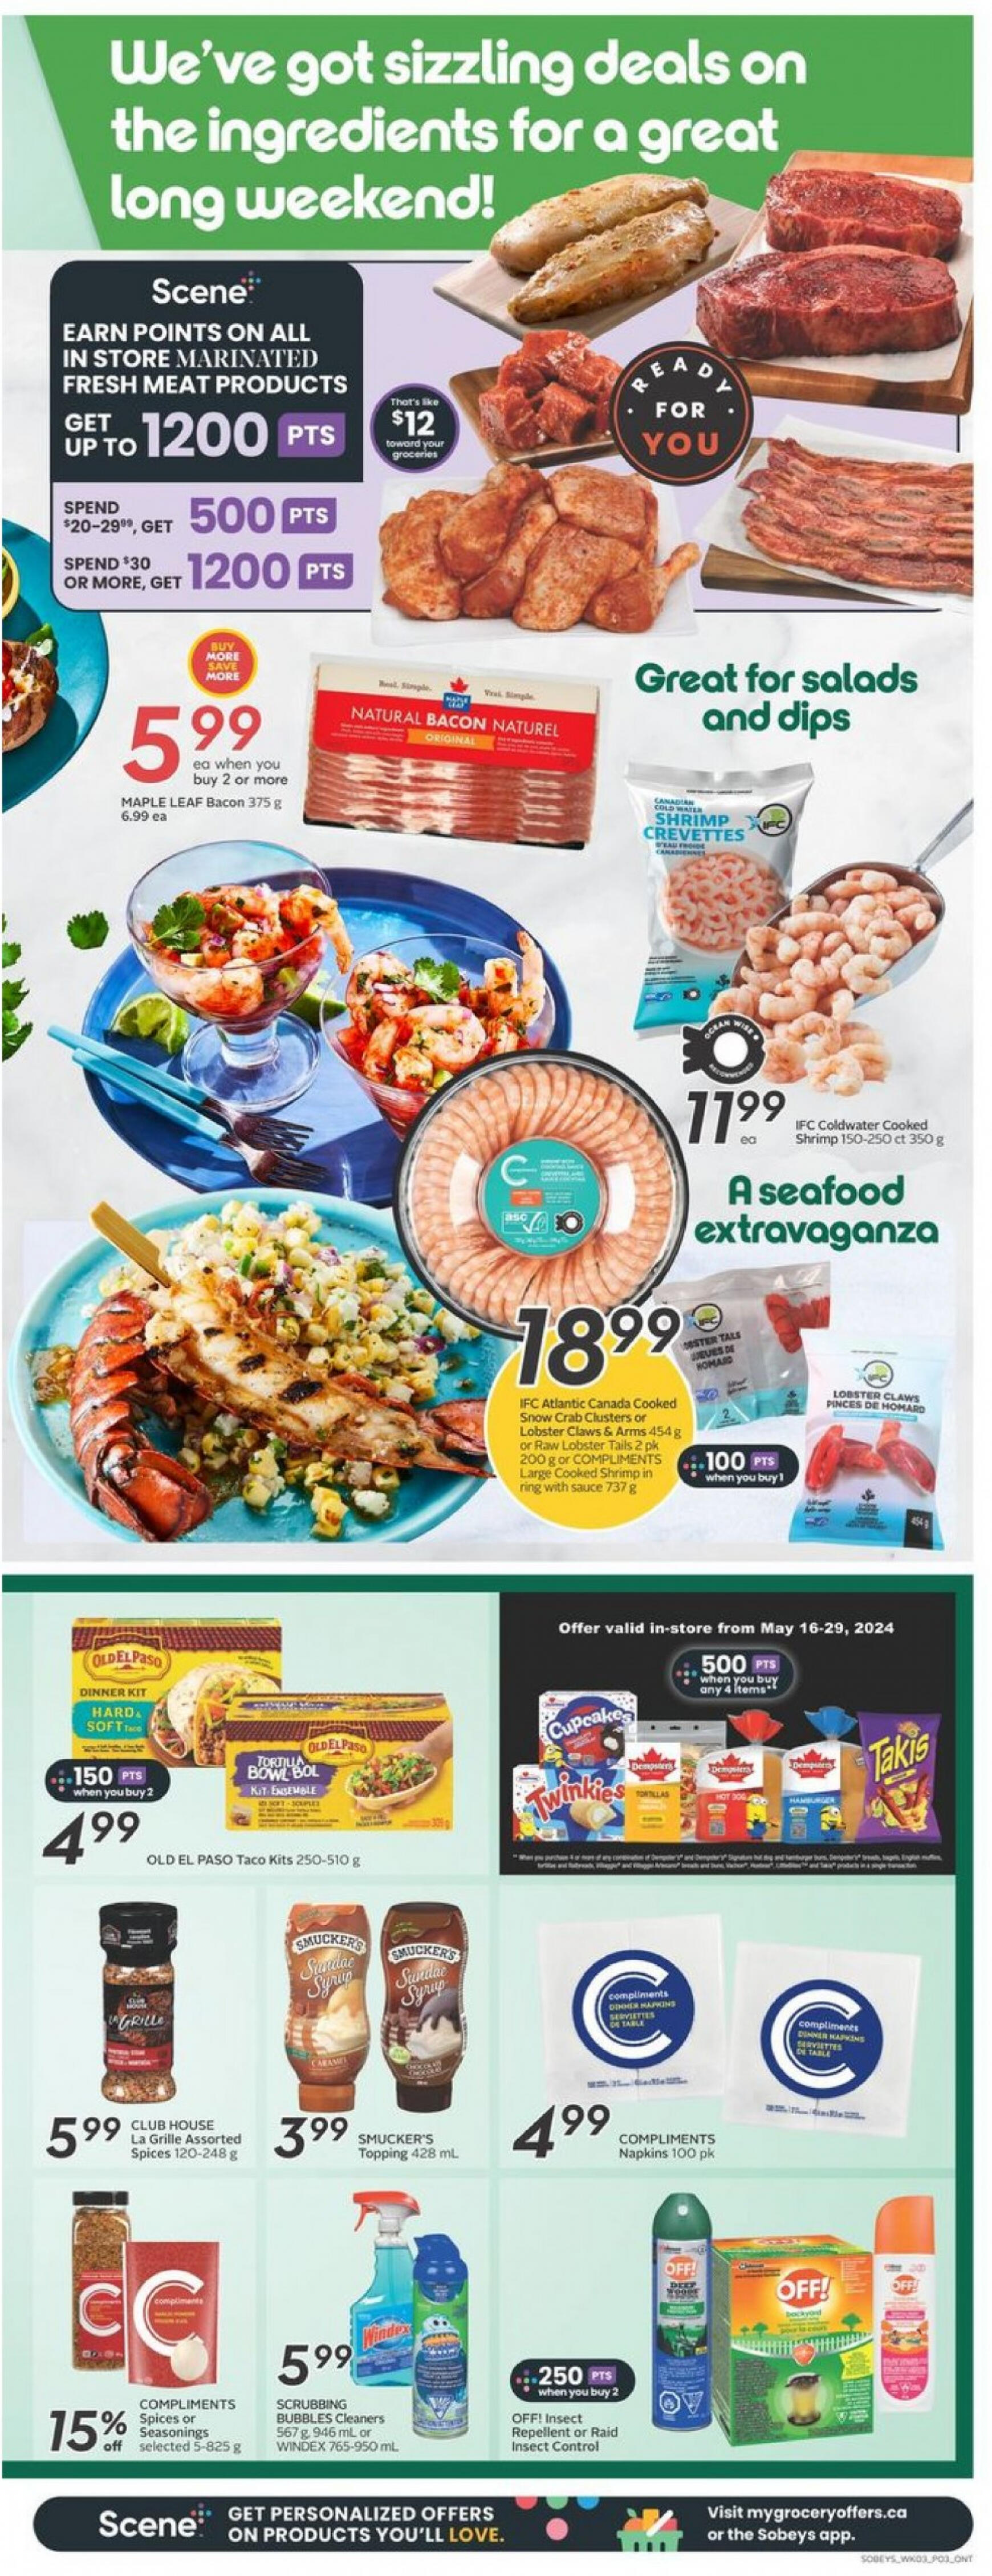 sobeys - Sobeys - Weekly Flyer - Ontario flyer current 16.05. - 22.05. - page: 7